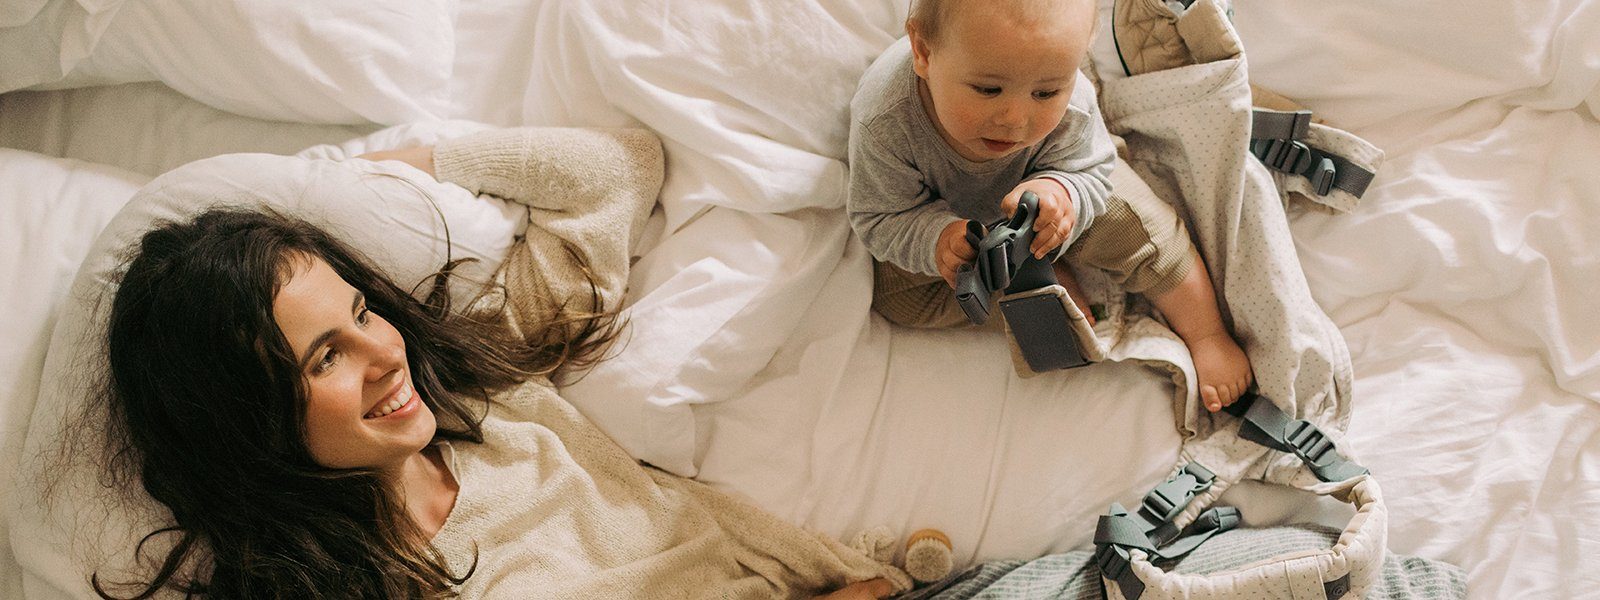 Benefits of Relaxing Your Child's Bedtime, & How to Make It Joyful